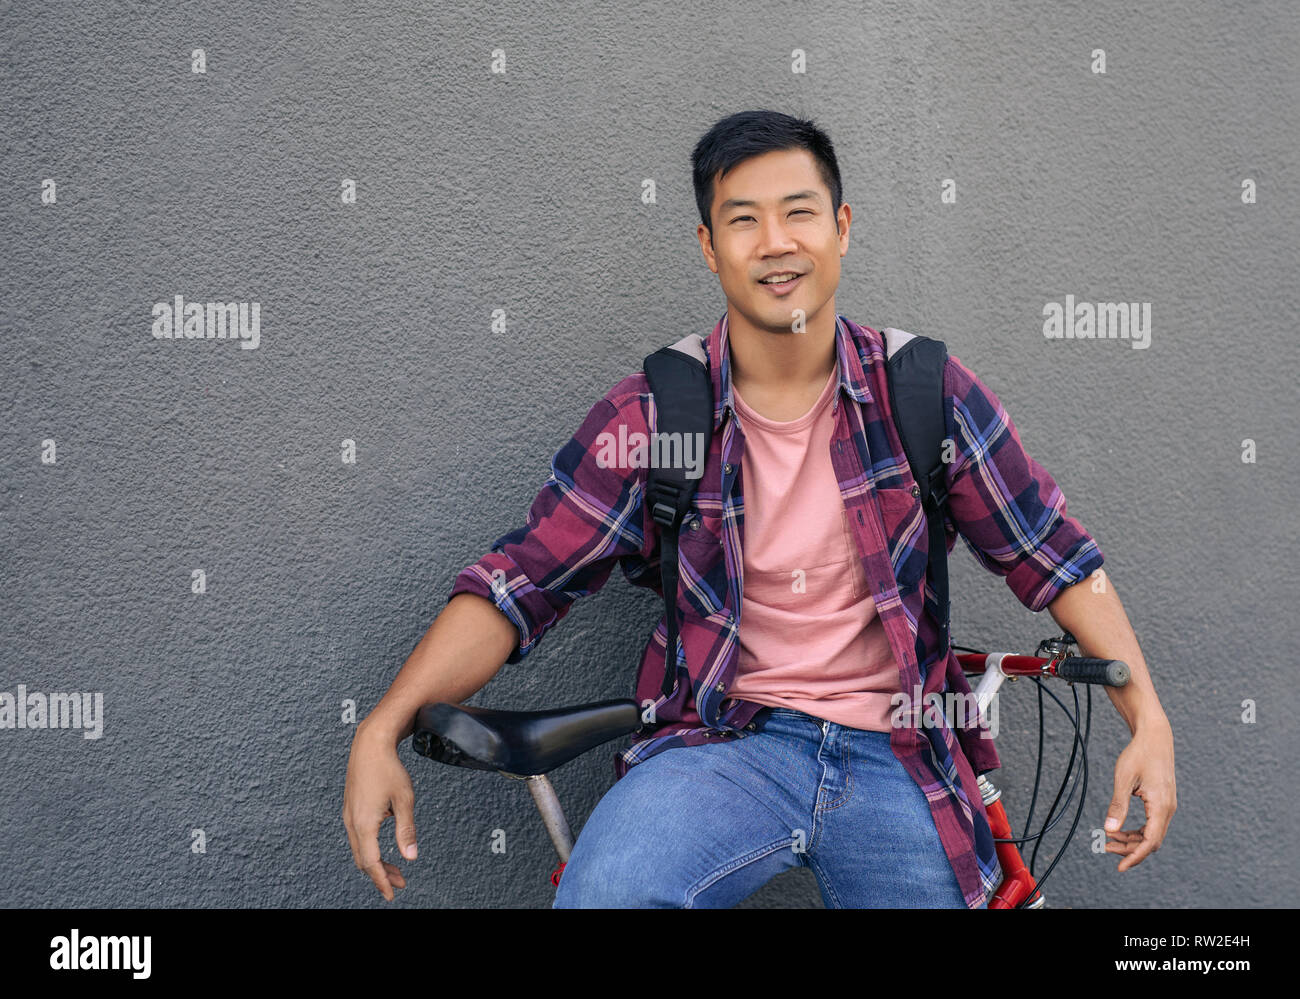 Smiling young man leaning with his bike against a wall Stock Photo